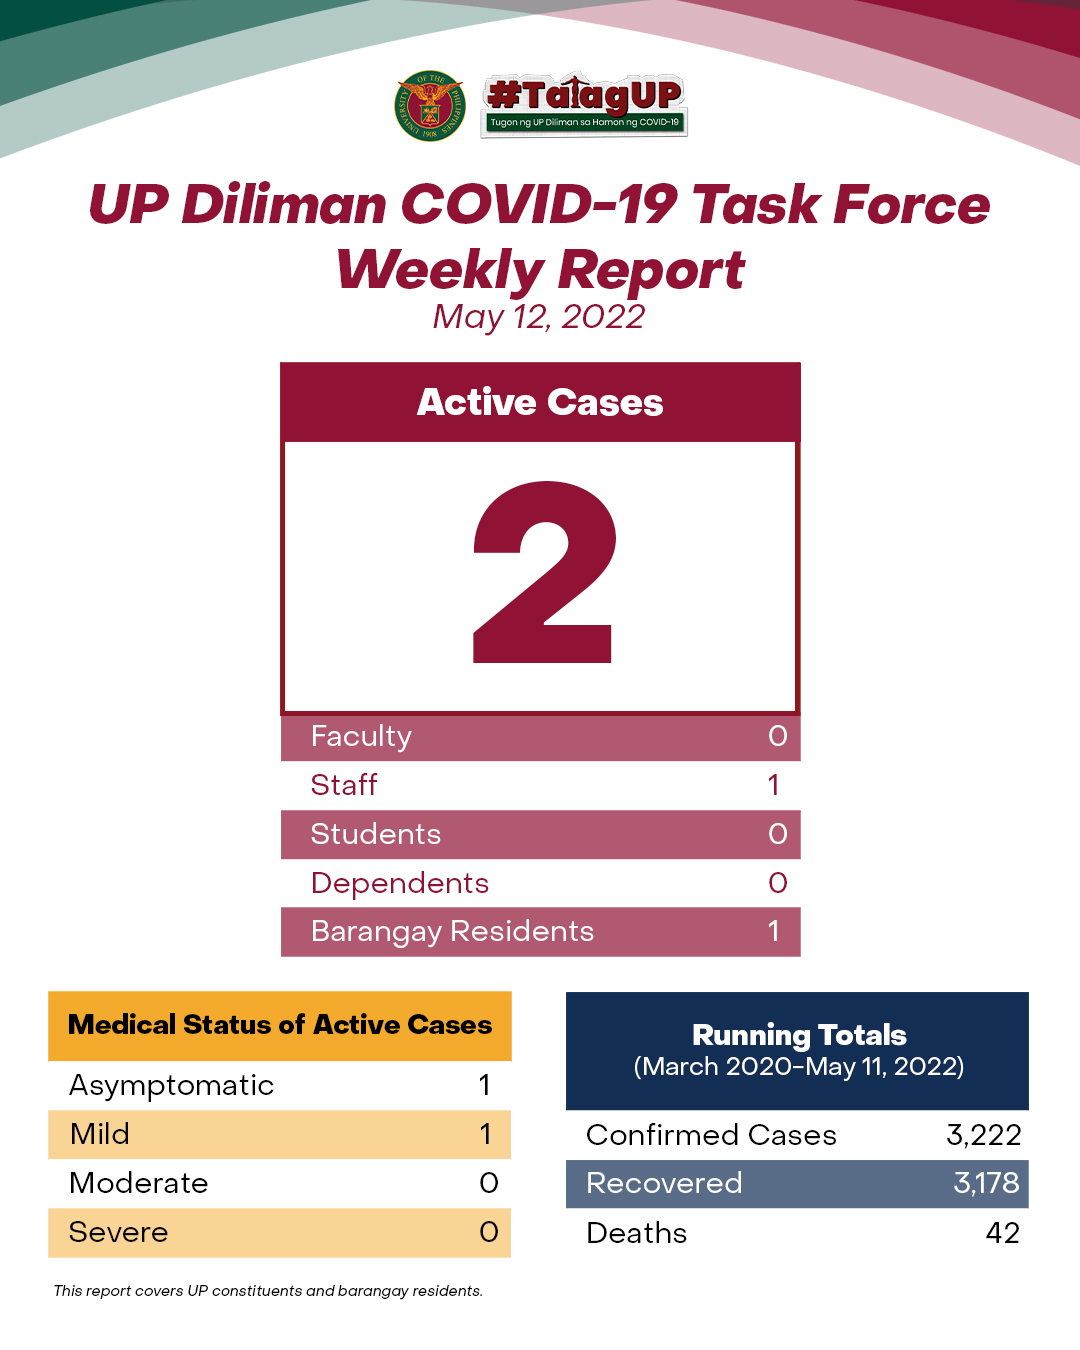 UP Diliman COVID-19 Task Force Weekly Report (May 12, 2022)